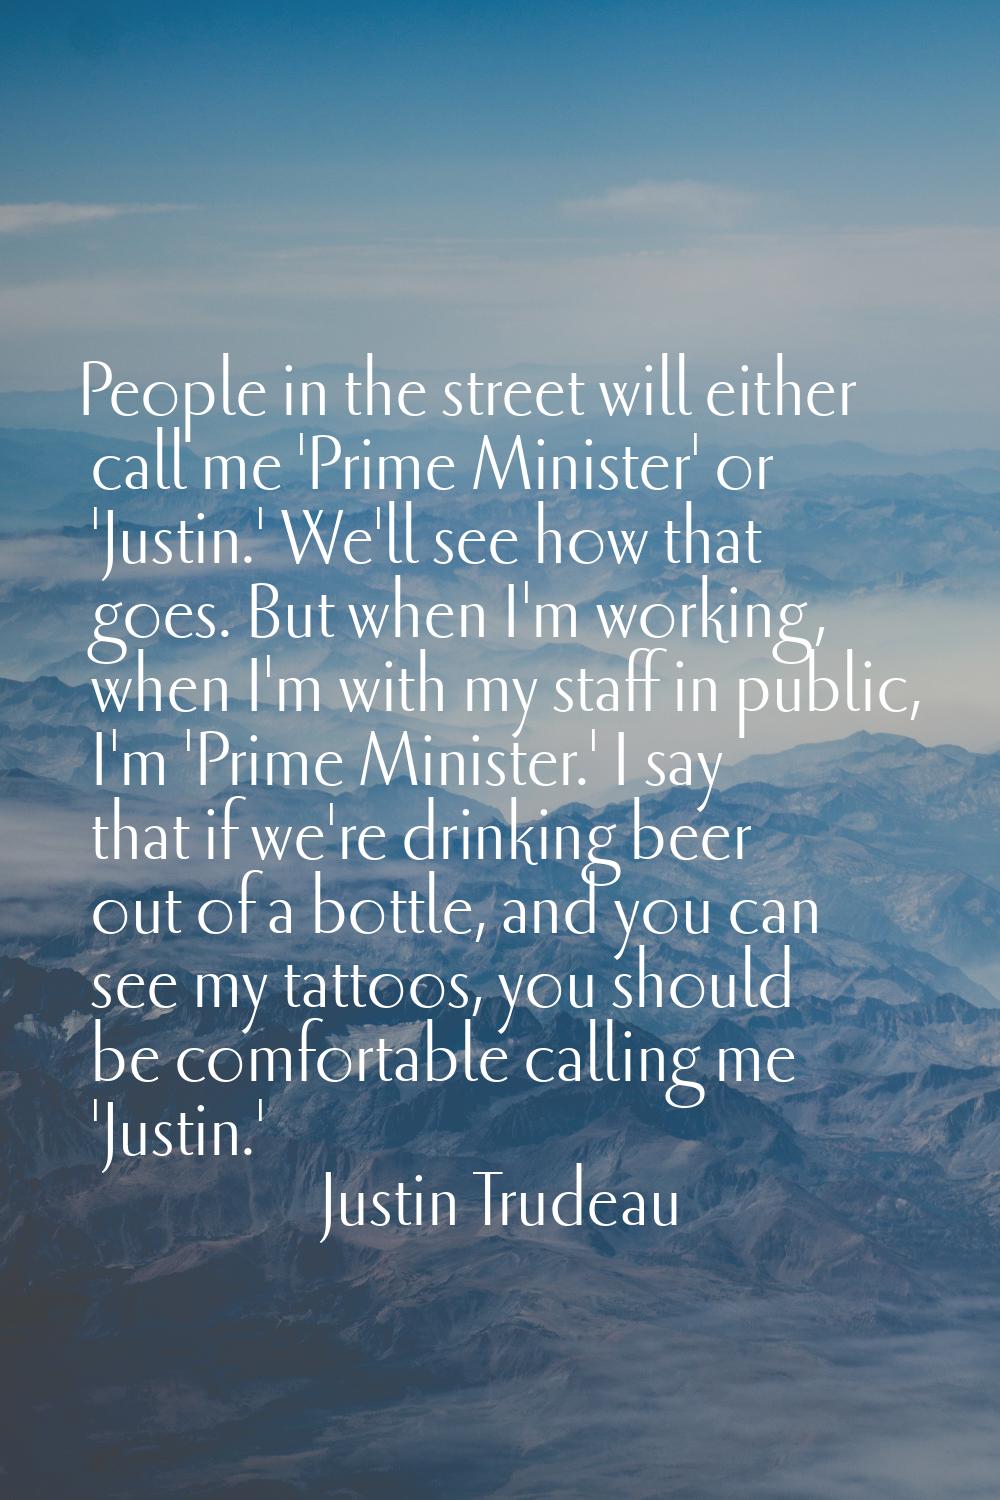 People in the street will either call me 'Prime Minister' or 'Justin.' We'll see how that goes. But